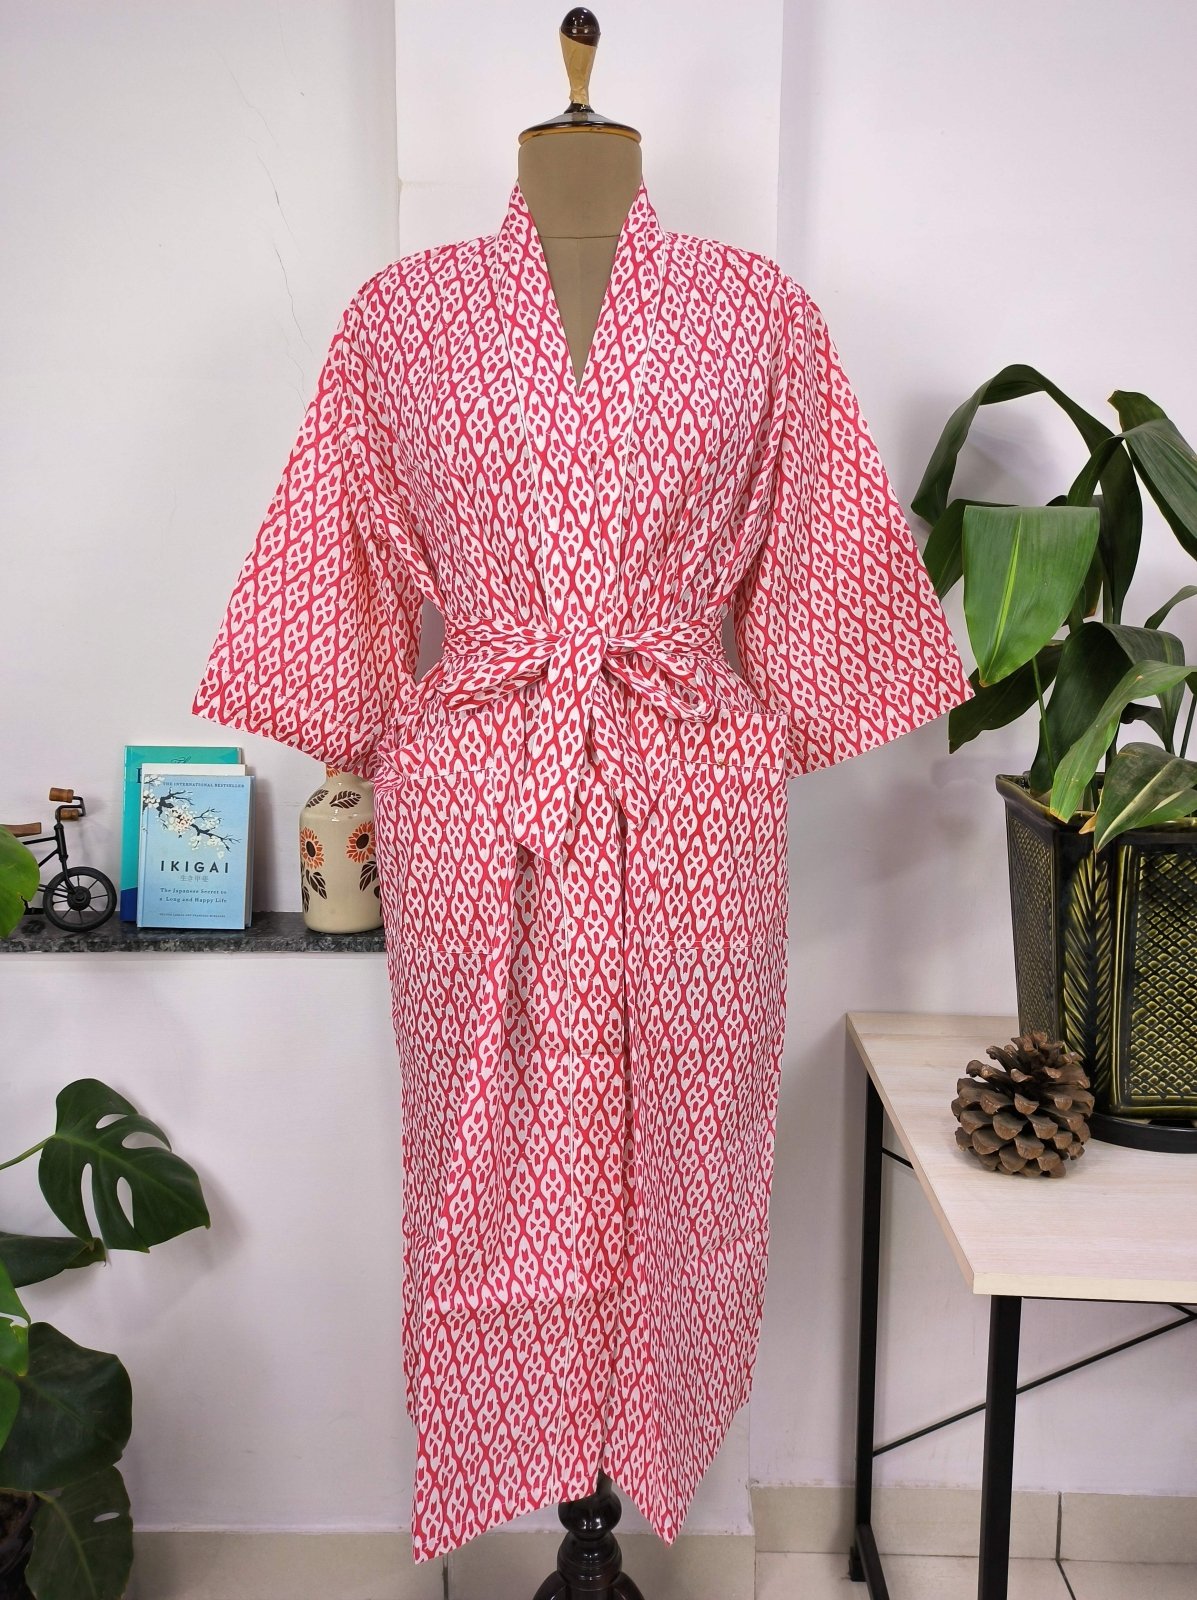 Boho Cotton Kimono House Robe Indian Handprinted Pink White Abstract Print | Lightweight Summer Luxury Beach Holiday Cover Up Stunning Dress - The Eastern Loom